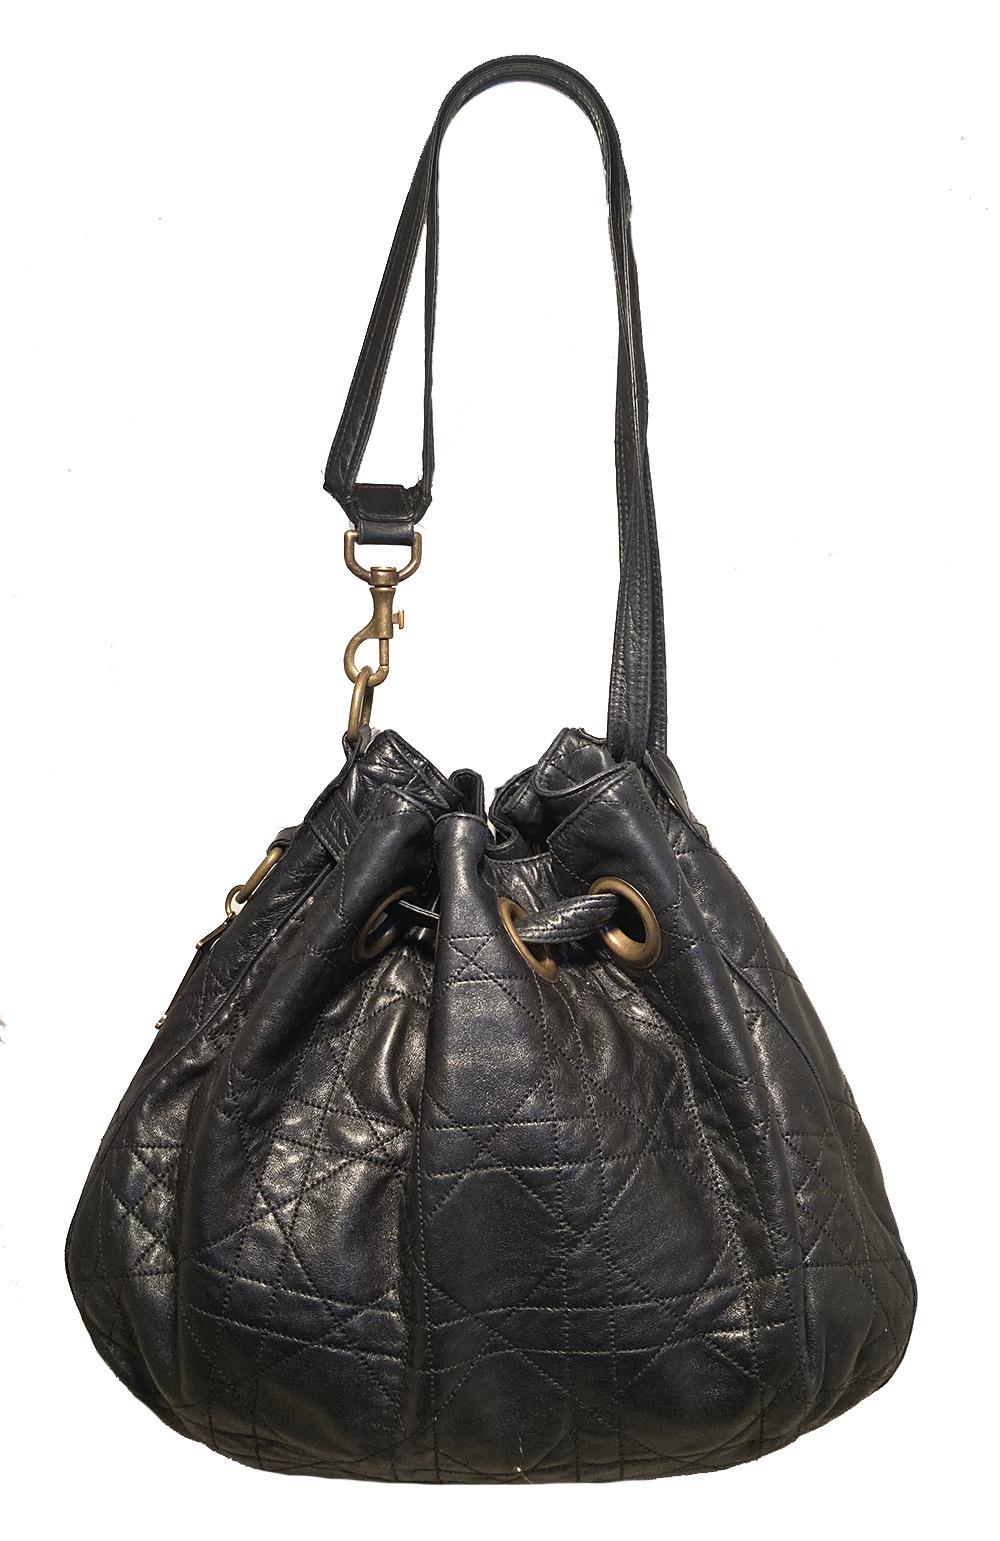 Christian Dior Black Leather Cannage Drawstring Shoulder Bag in very good condition. black cannage quilted leather trimmed with antiqued bronze hardware. Drawstring style top opens to a red nylon lined interior with one zip and 2 slit side pockets.